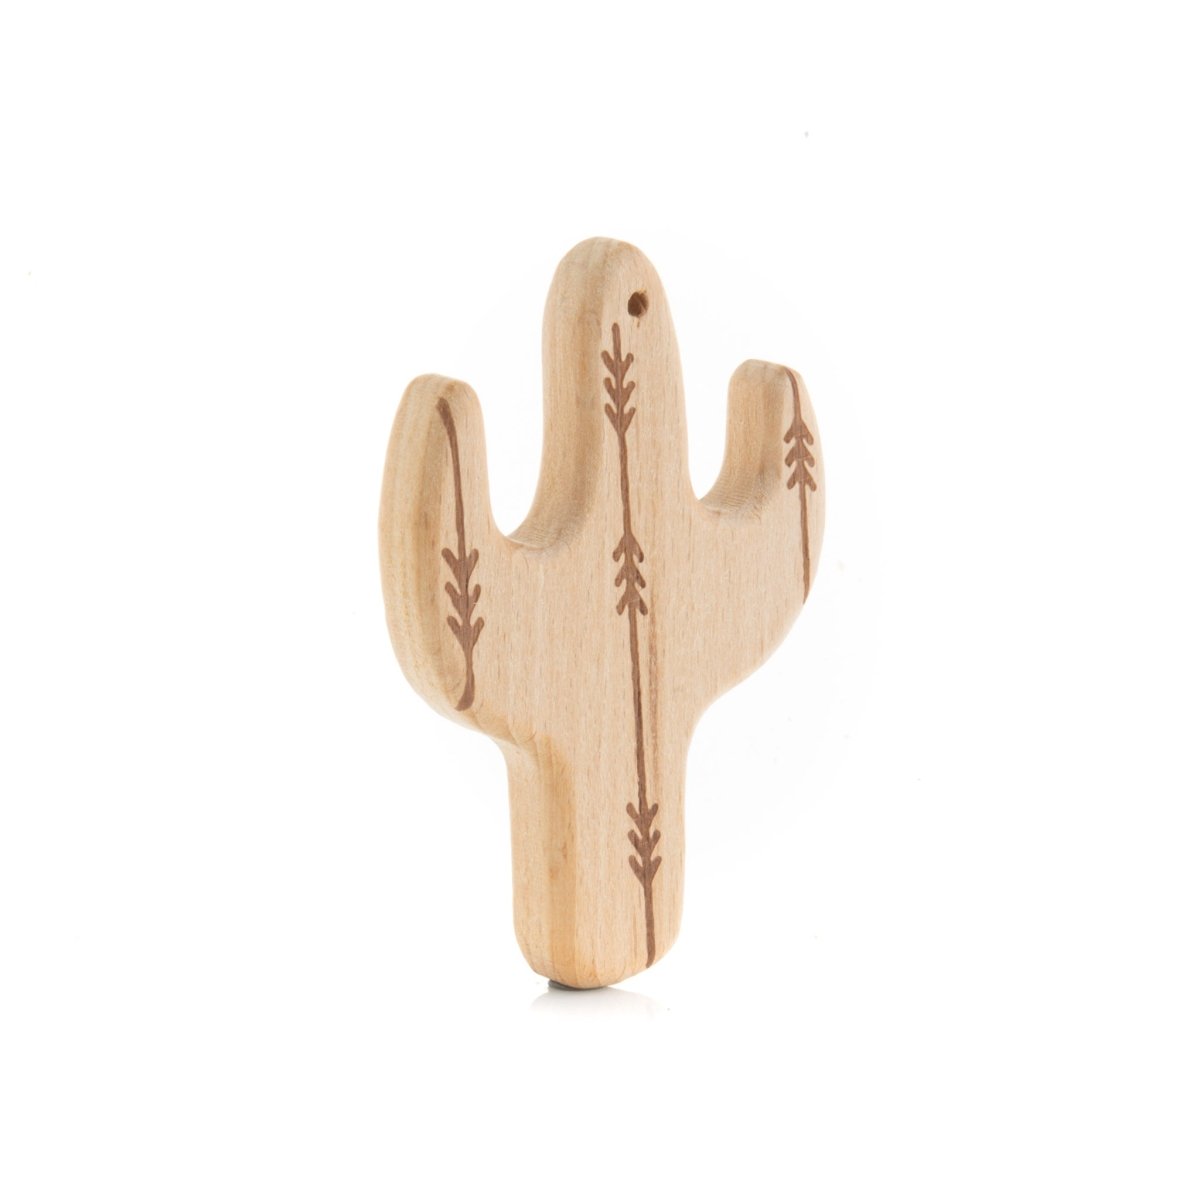 Wood Rings & Pendants Small - Beech Wood Cactus from Cara & Co Craft Supply